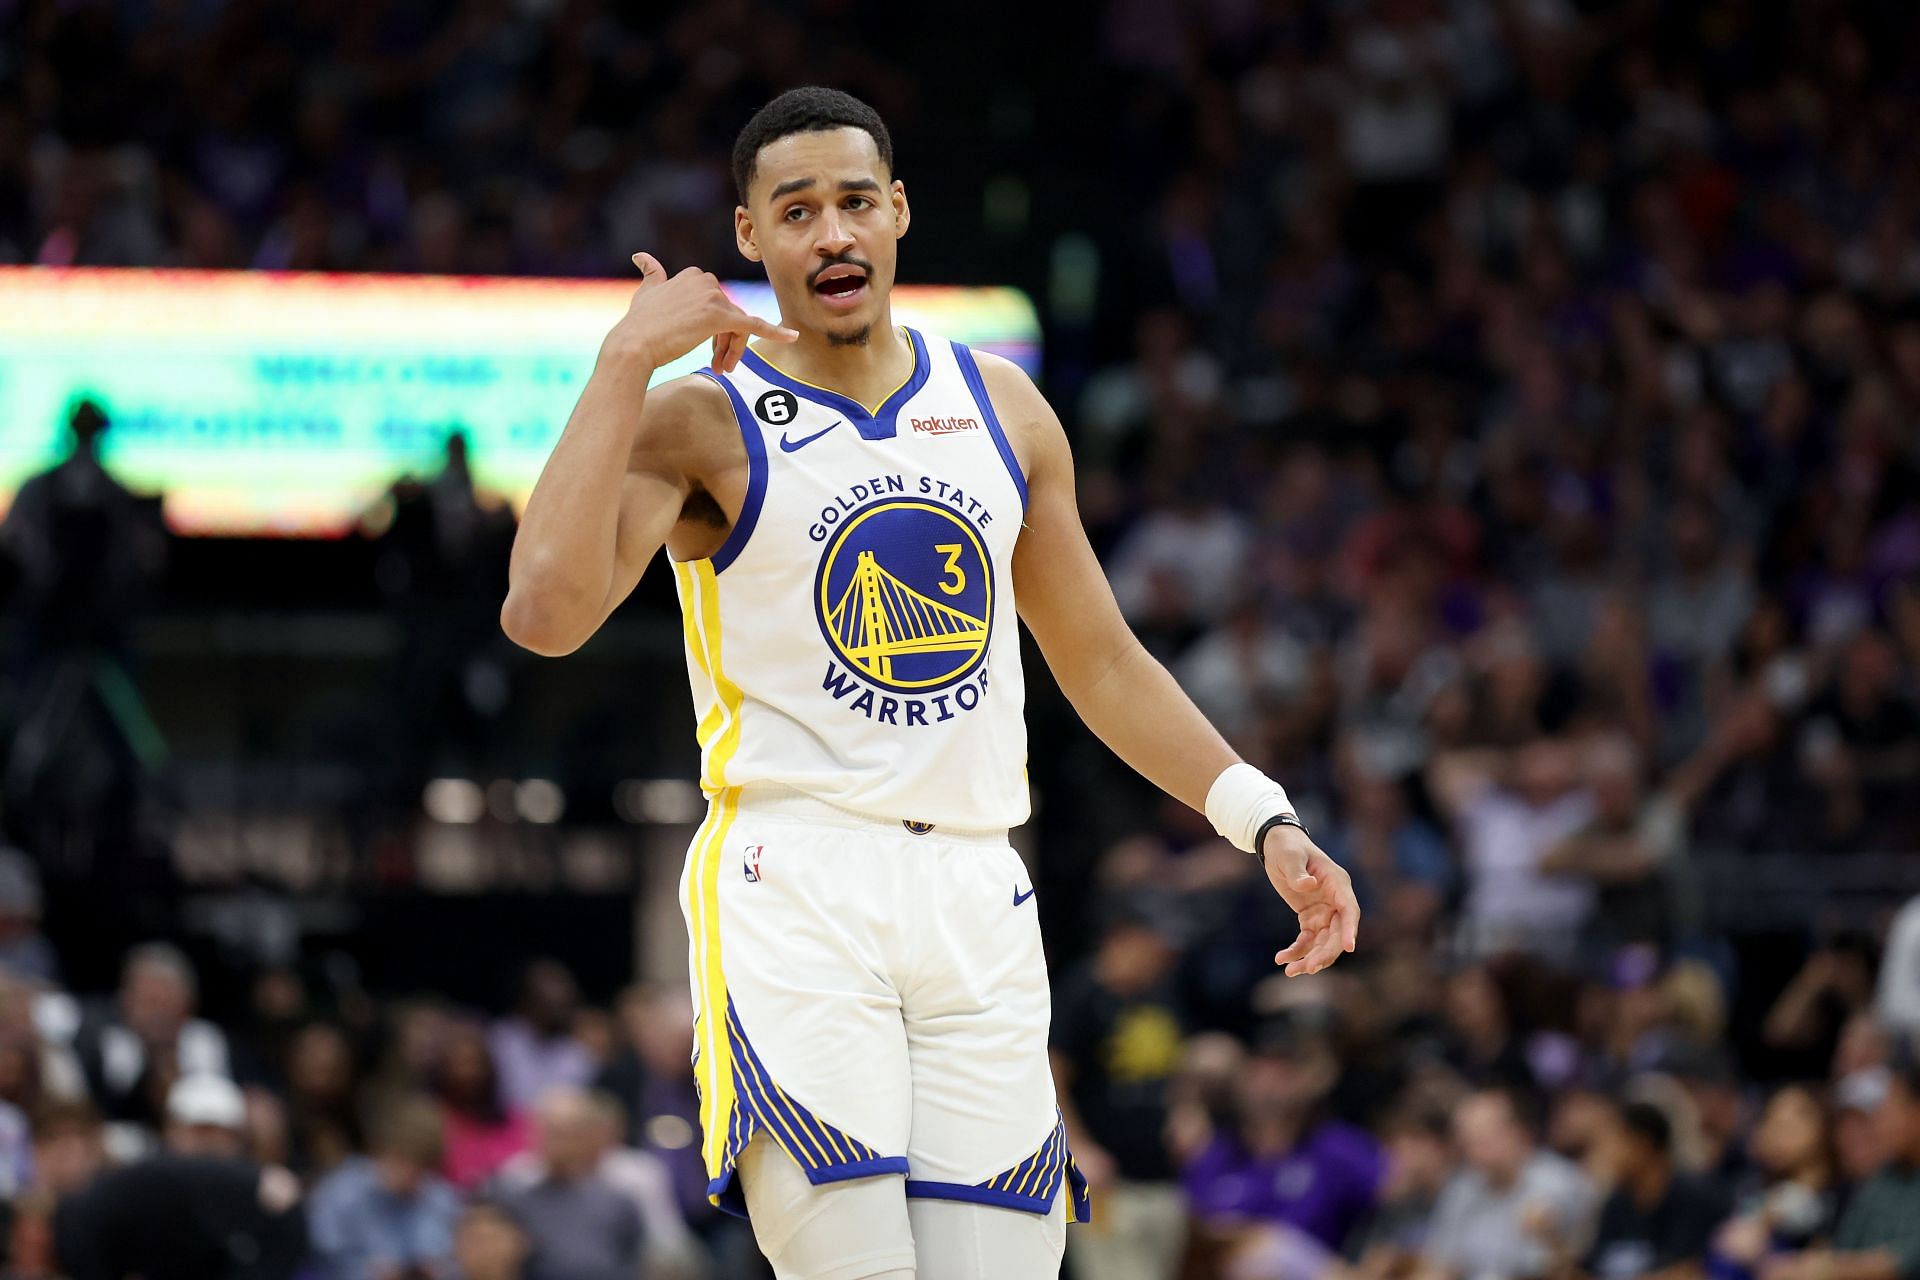 Mihawu on X: Jordan Poole's progress this season is obvious to all. Pu'er  tea is full of fragrance. Sign a big contract with him. 🏀💰💰💰💰  @warriors @WarriorsPR @NBCSWarriors #jordanpoole #poole #nba #